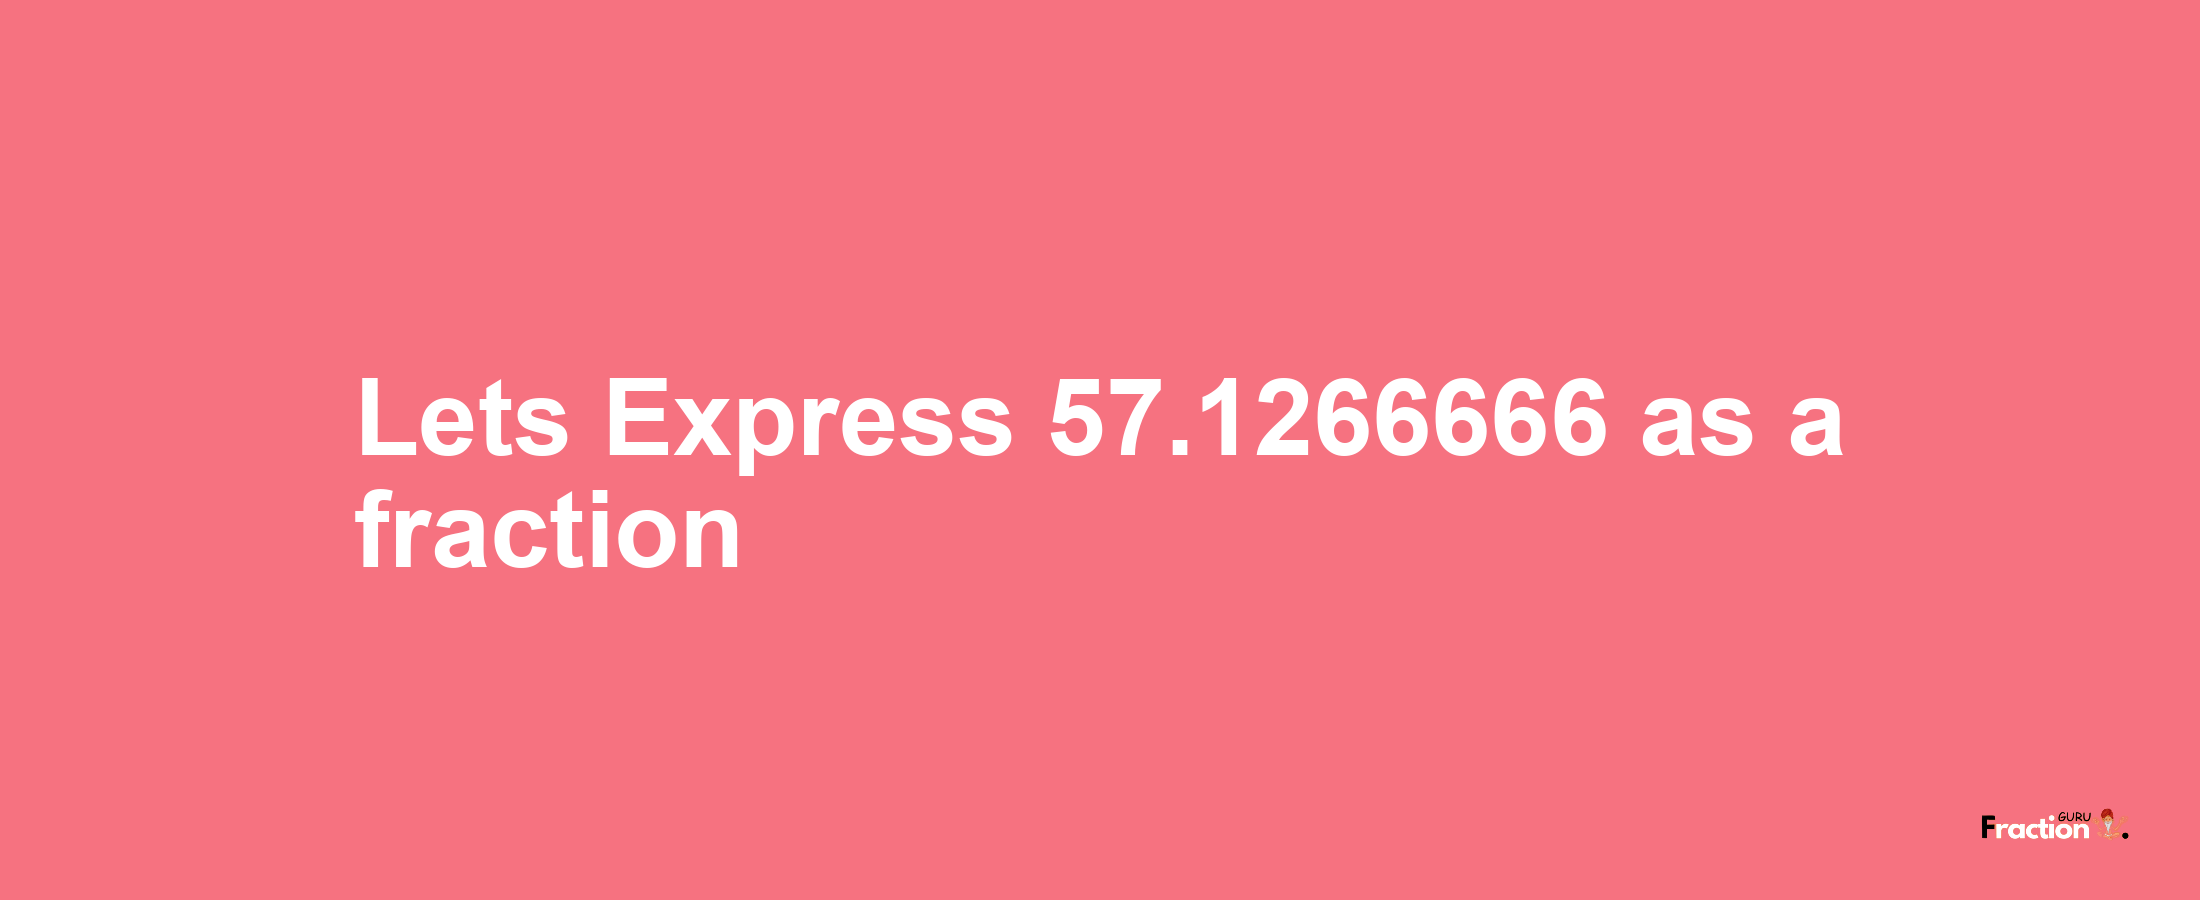 Lets Express 57.1266666 as afraction